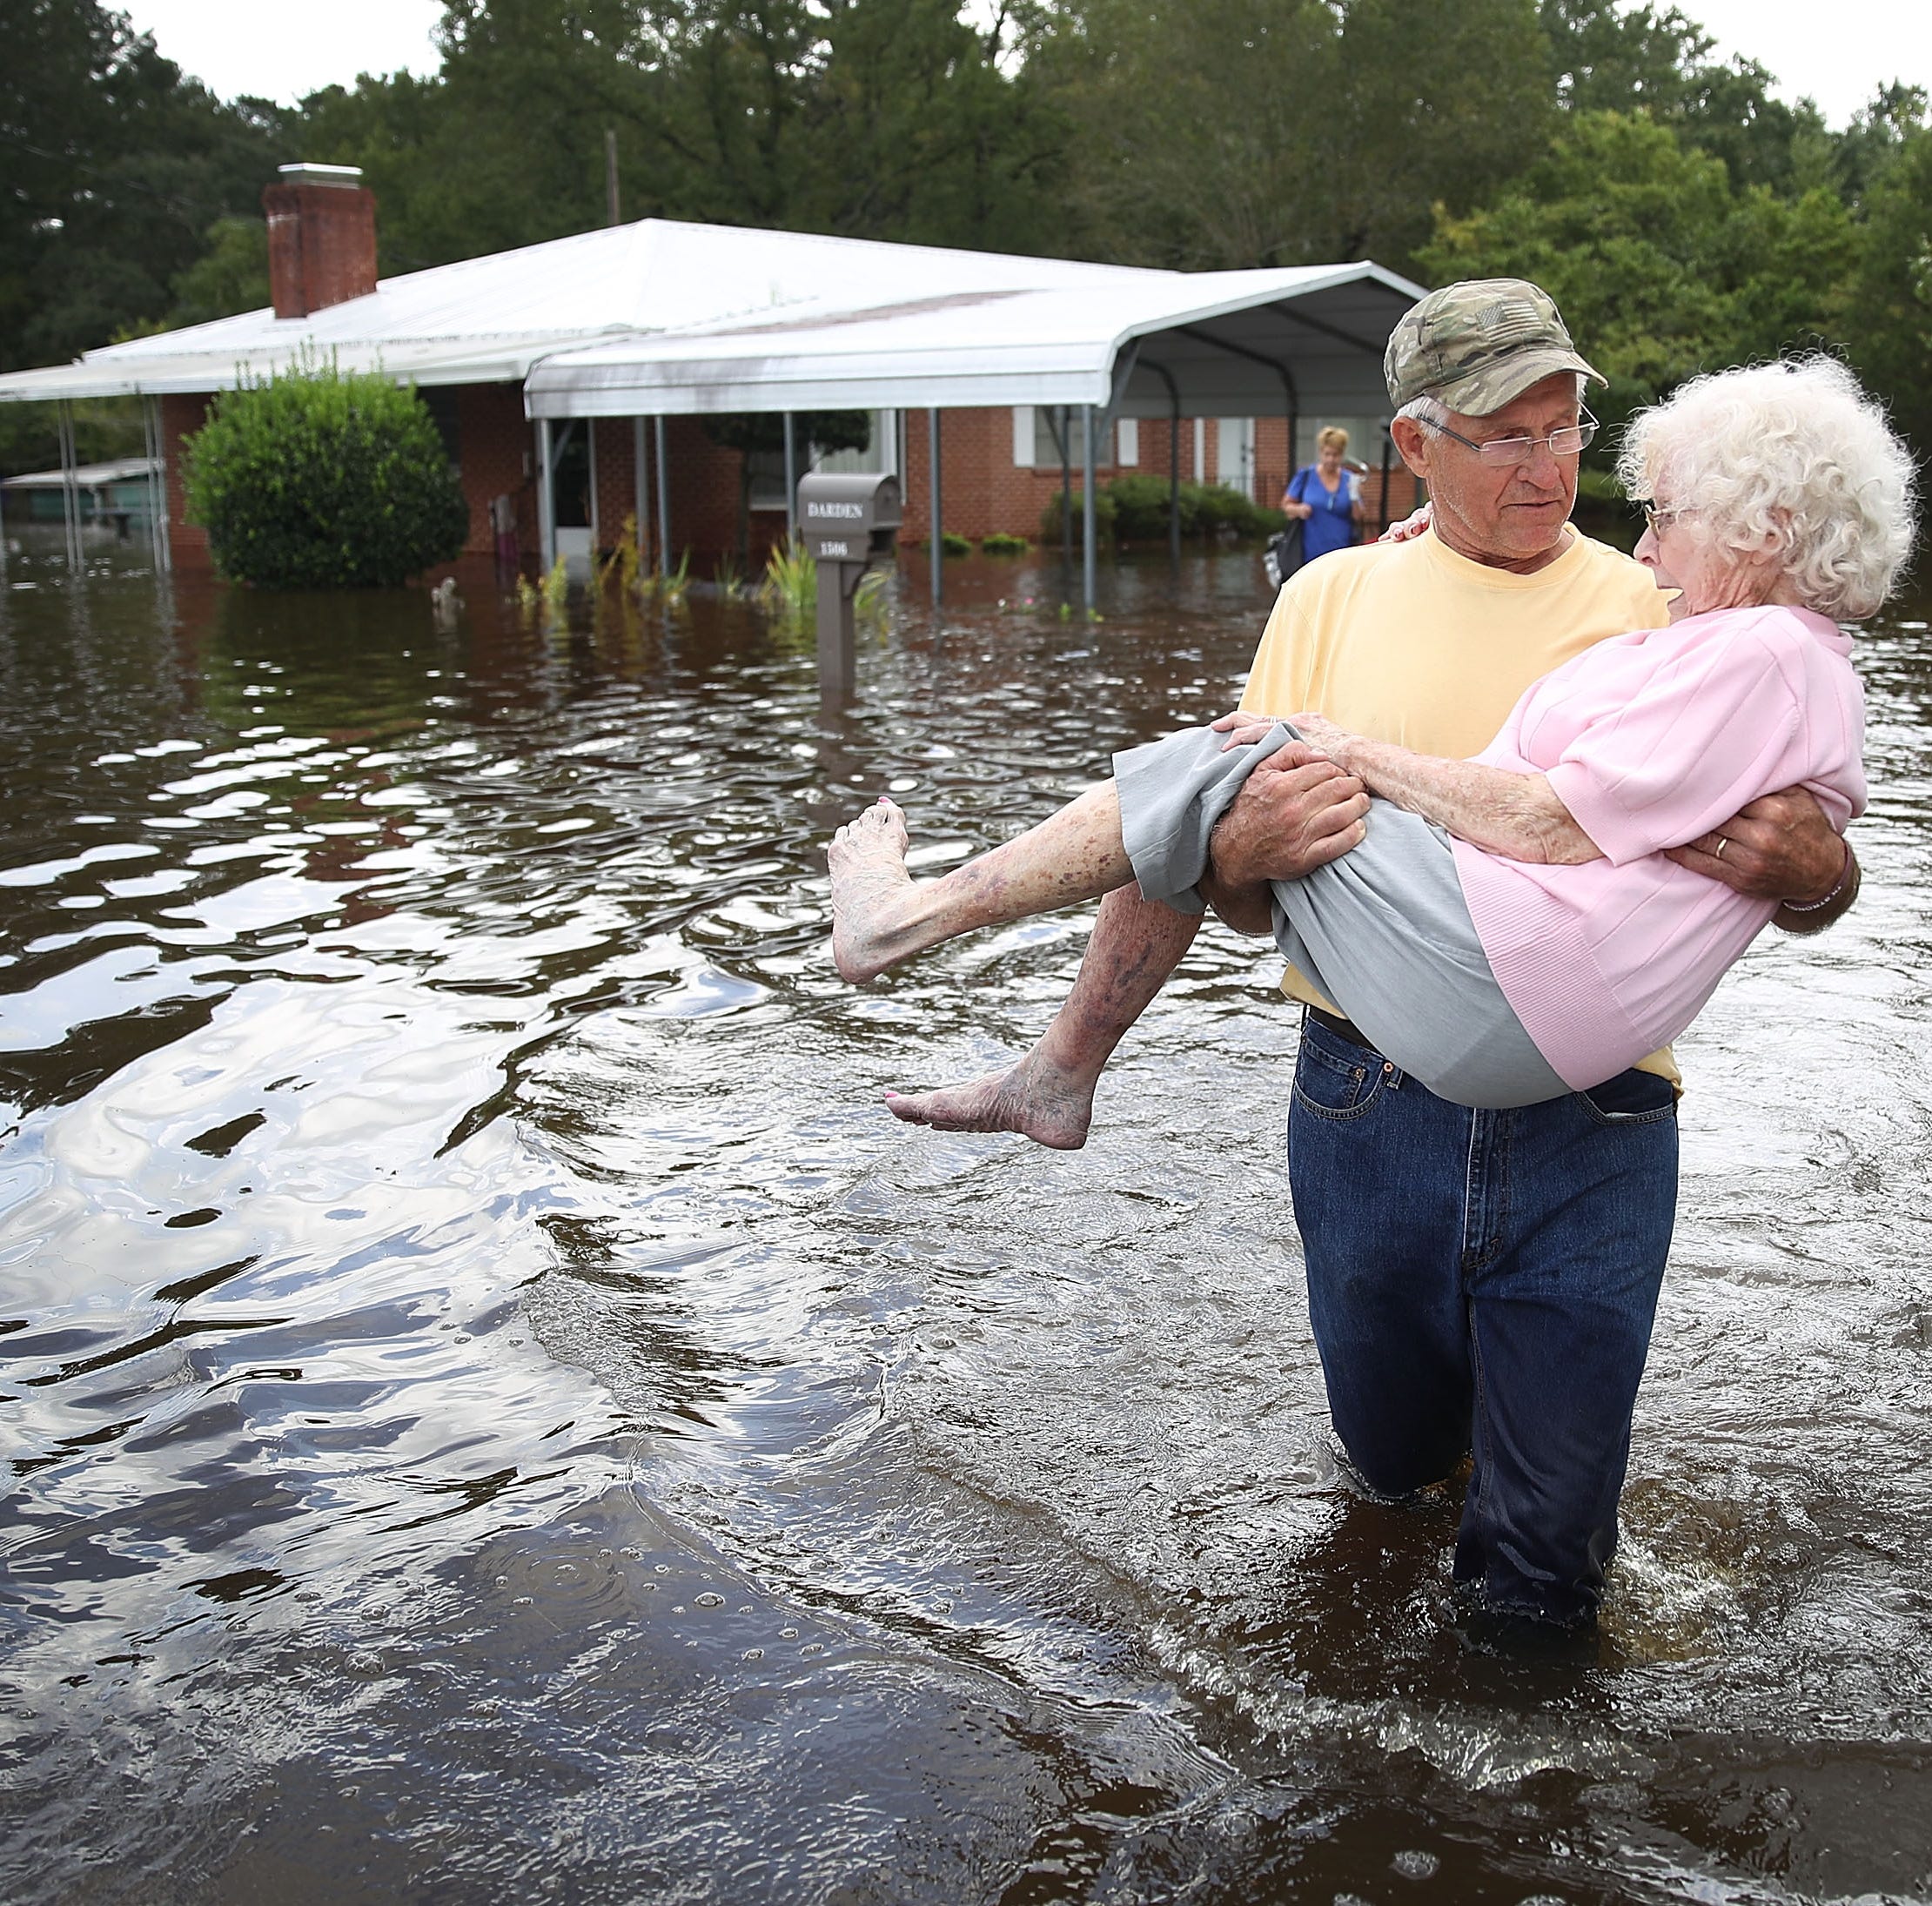 Bob Richling carries Iris Darden as water from the Little River starts to seep into her home on Sept. 17, 2018 in Spring Lake, North Carolina. Flood waters from the cresting rivers inundated the area after the passing of Hurricane Florence.